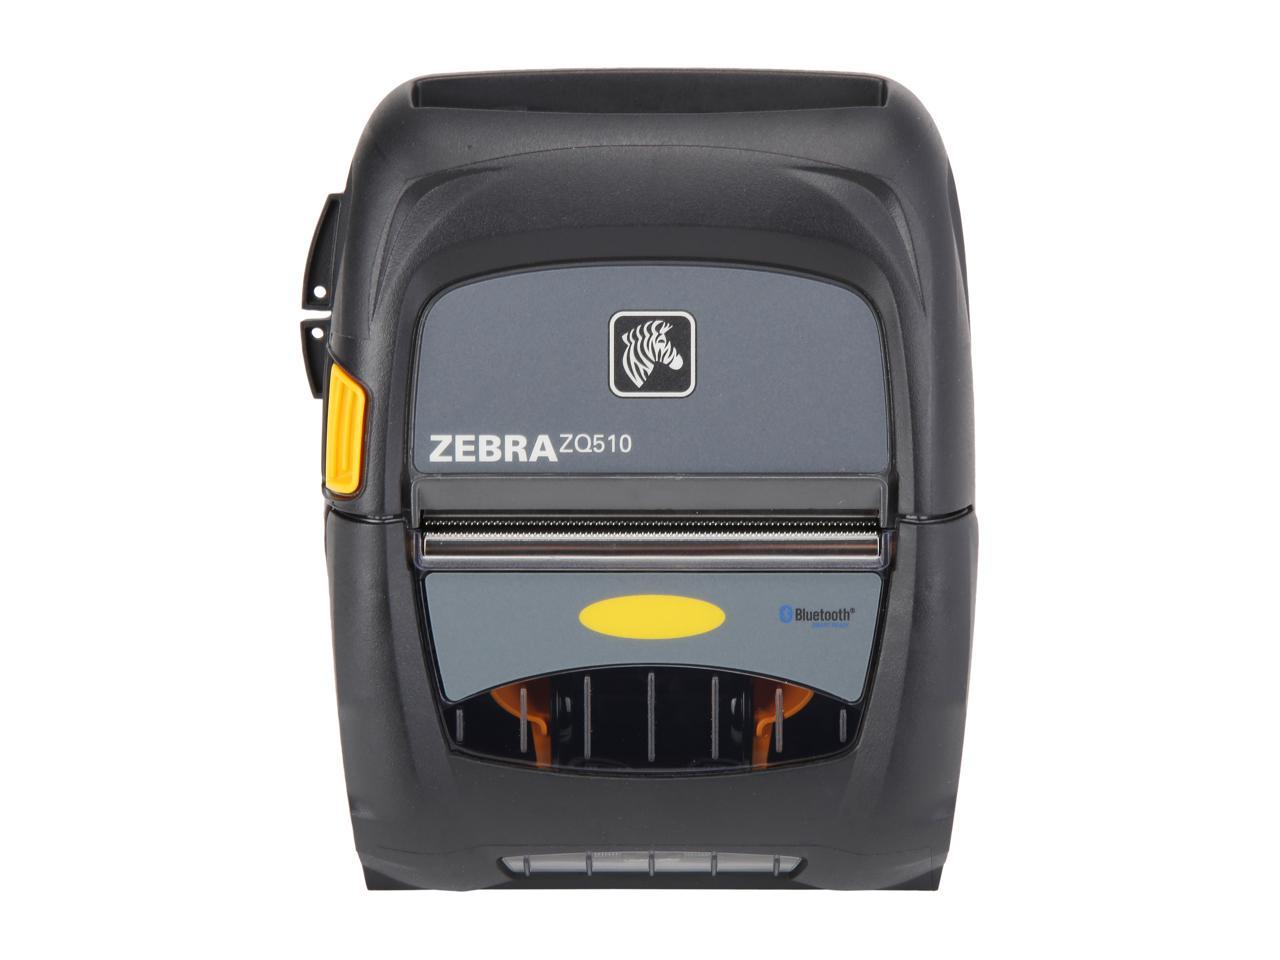 Zebra Zq510 3 Mobile Direct Thermal Receipt And Label Printer 203 Dpi Bluetooth 40 Linered 2739